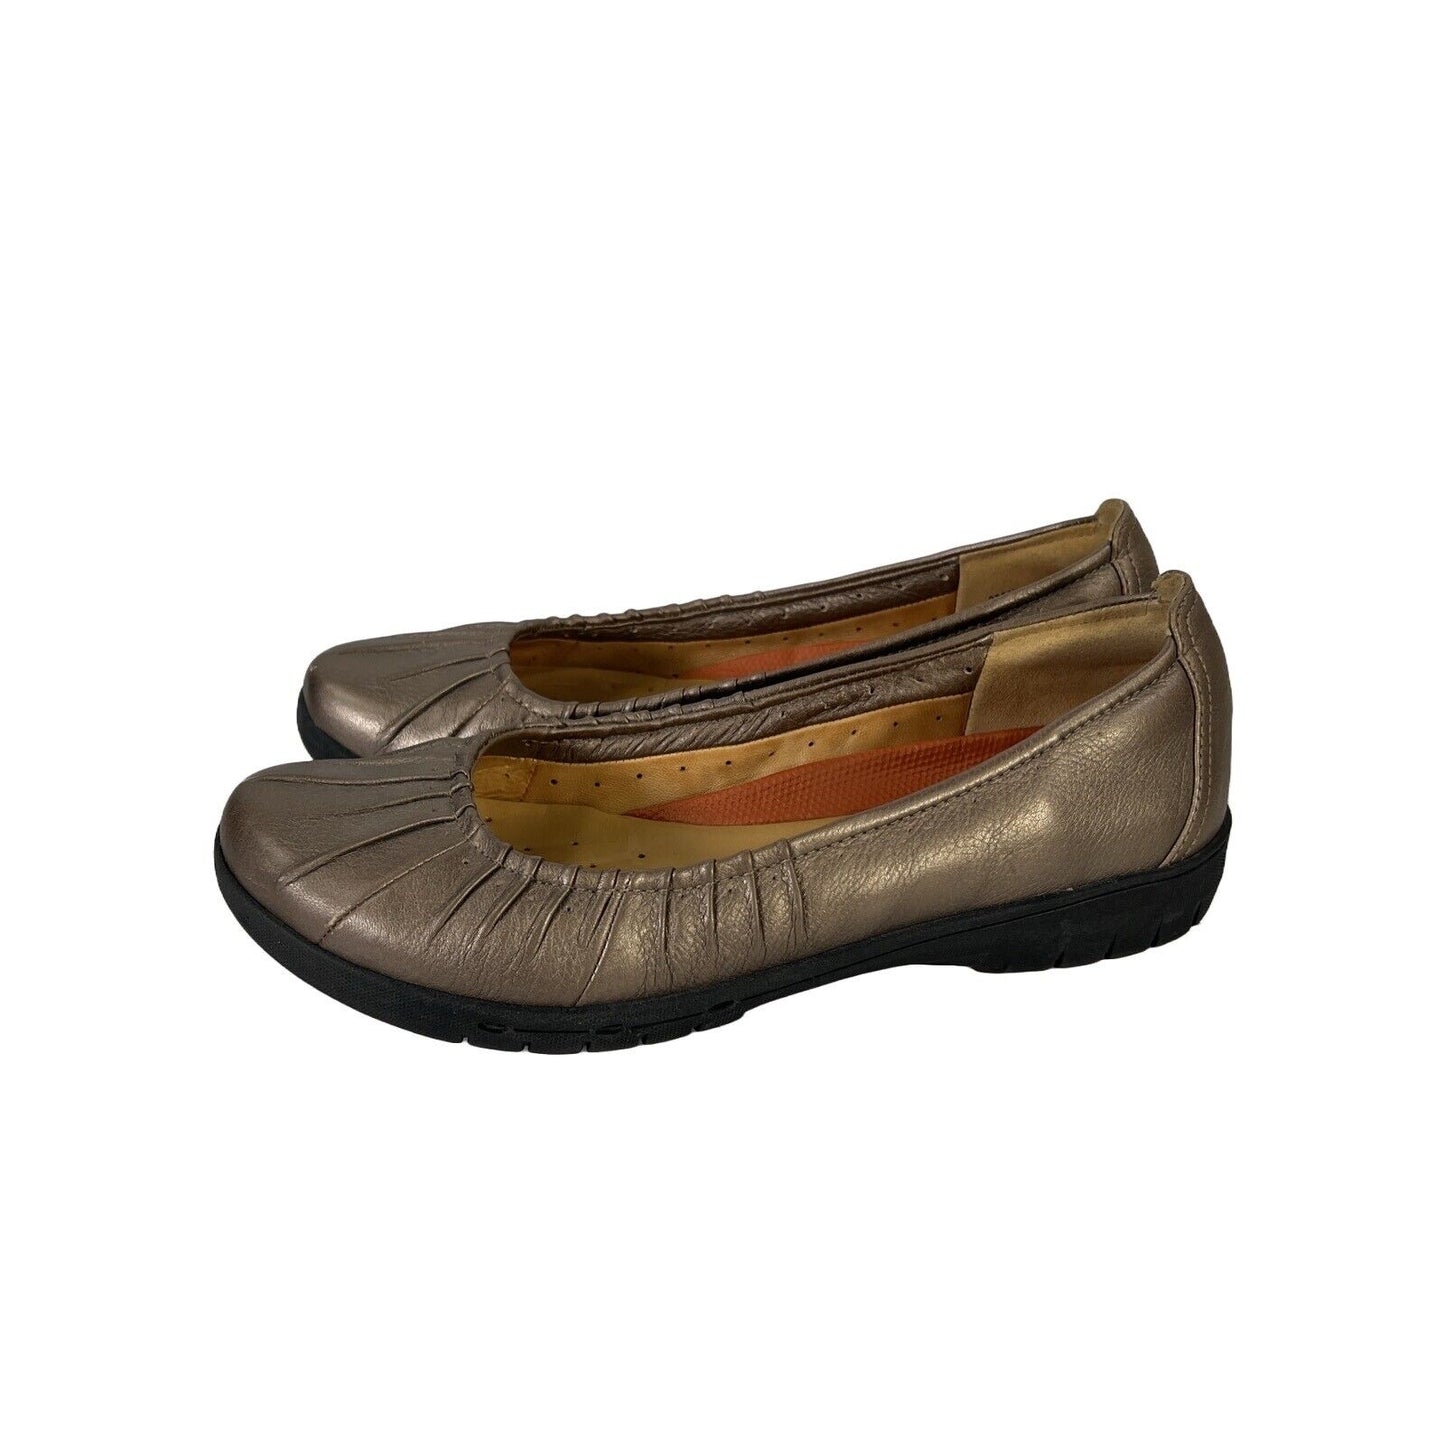 Clarks Unstructured Women's Brown/Bronze Leather Slip On Flats - 8